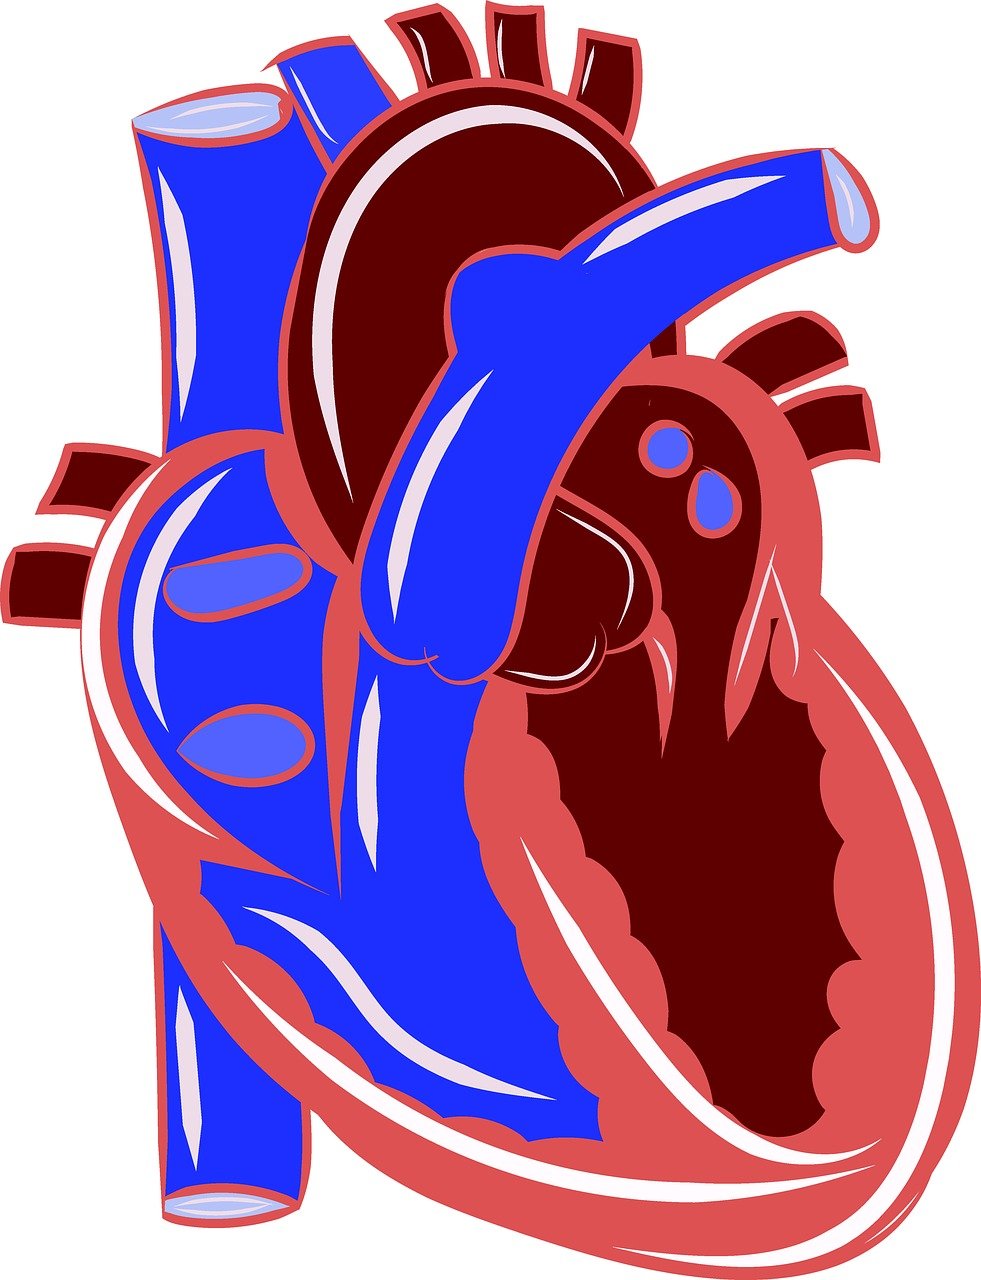 a drawing of a human heart, an illustration of, process art, blue and red color scheme, high contrast illustration, stylized bold outline, upper body close up